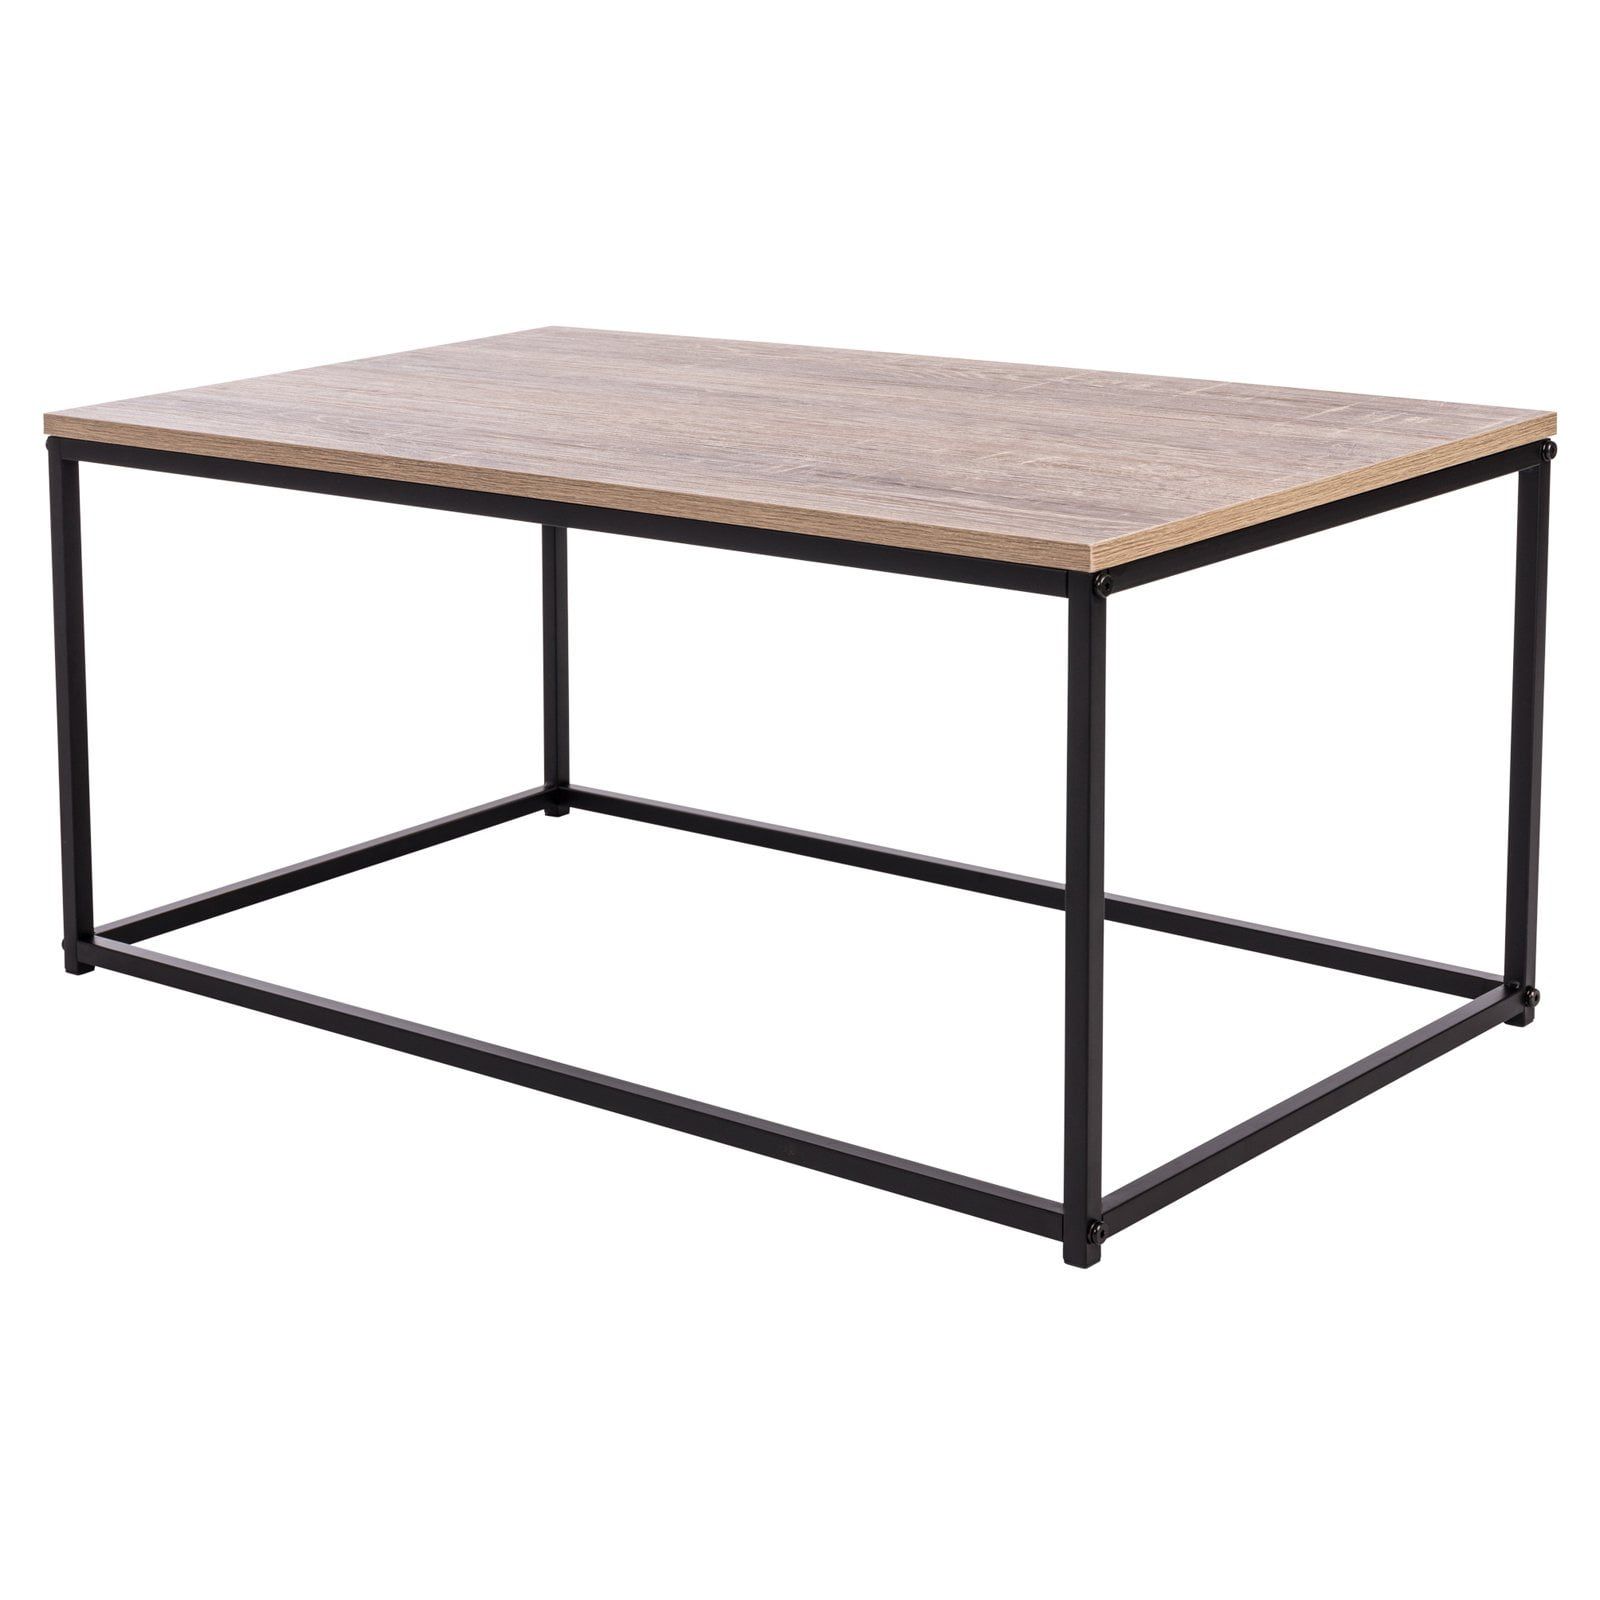 Preferred Coffee Tables For 4 6 People For Avalon Home Tribeca Coffee Table – Walmart (View 3 of 15)